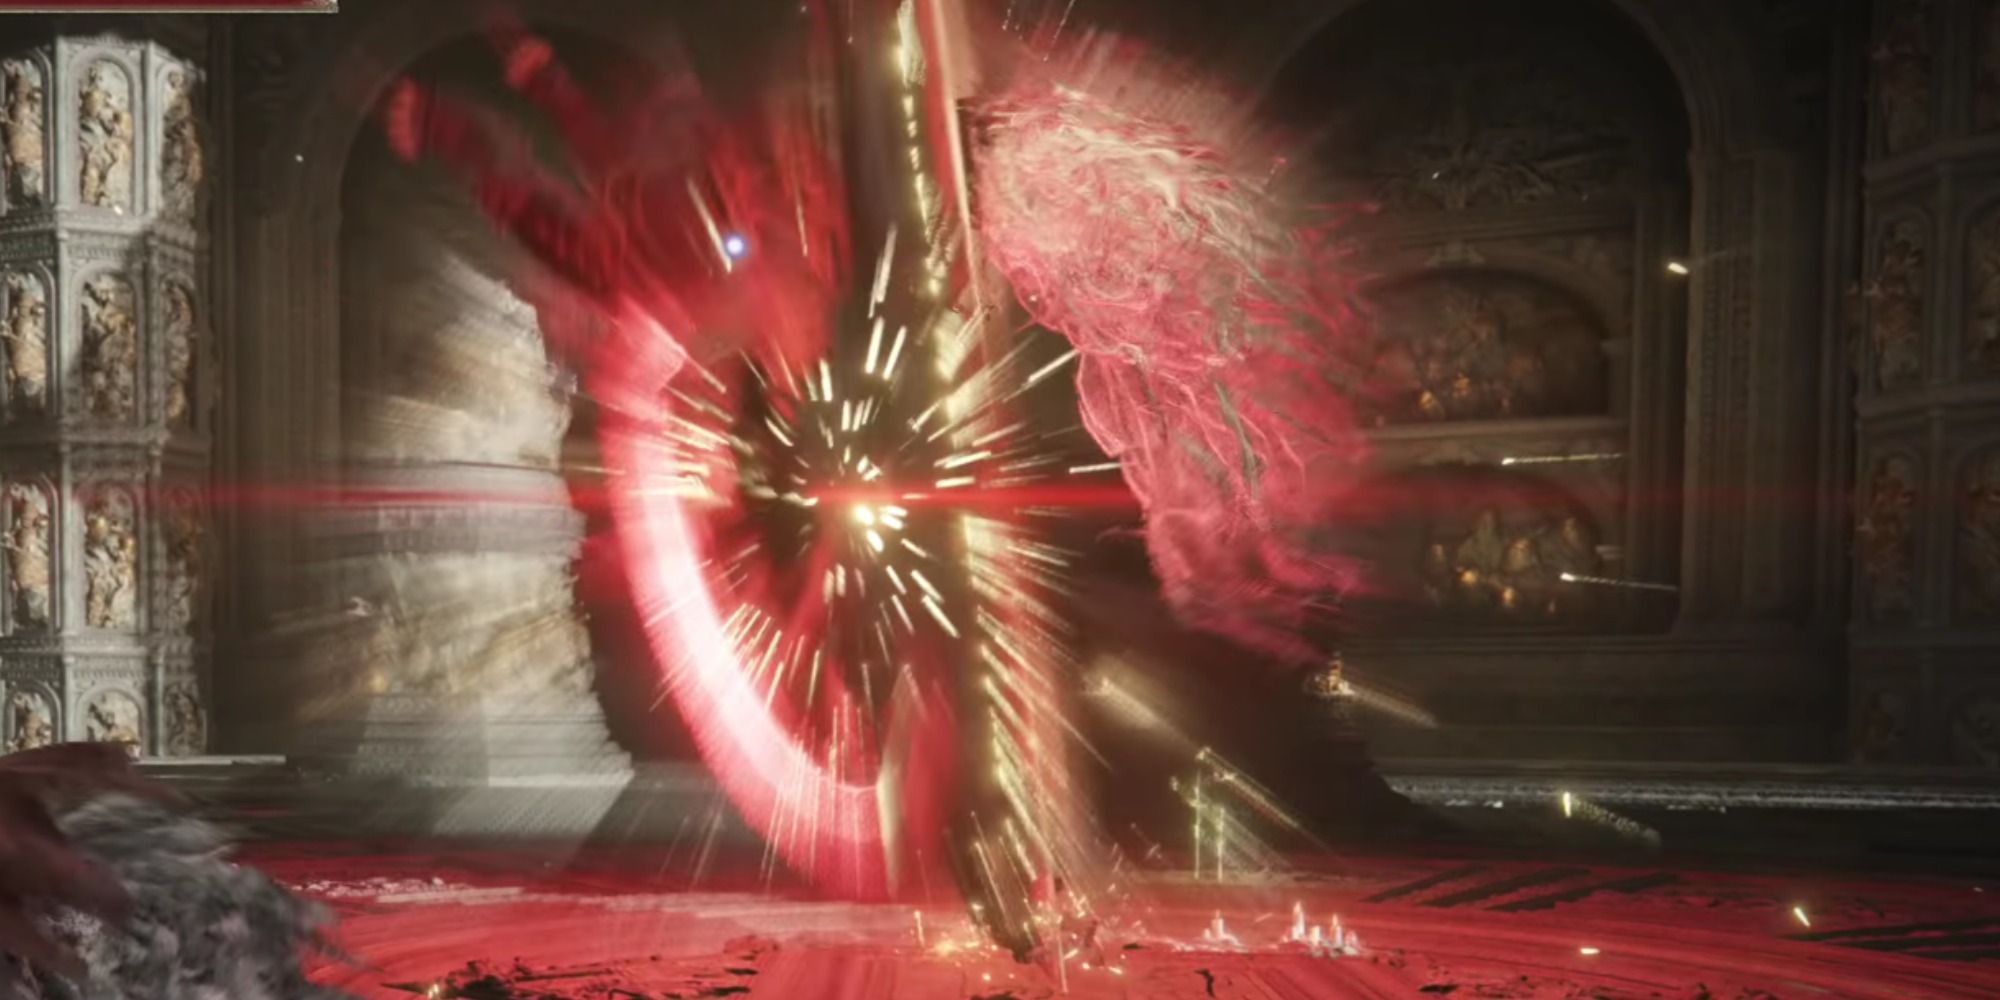 Maliketh launches vertical red waves from his sword at the player in Elden Ring